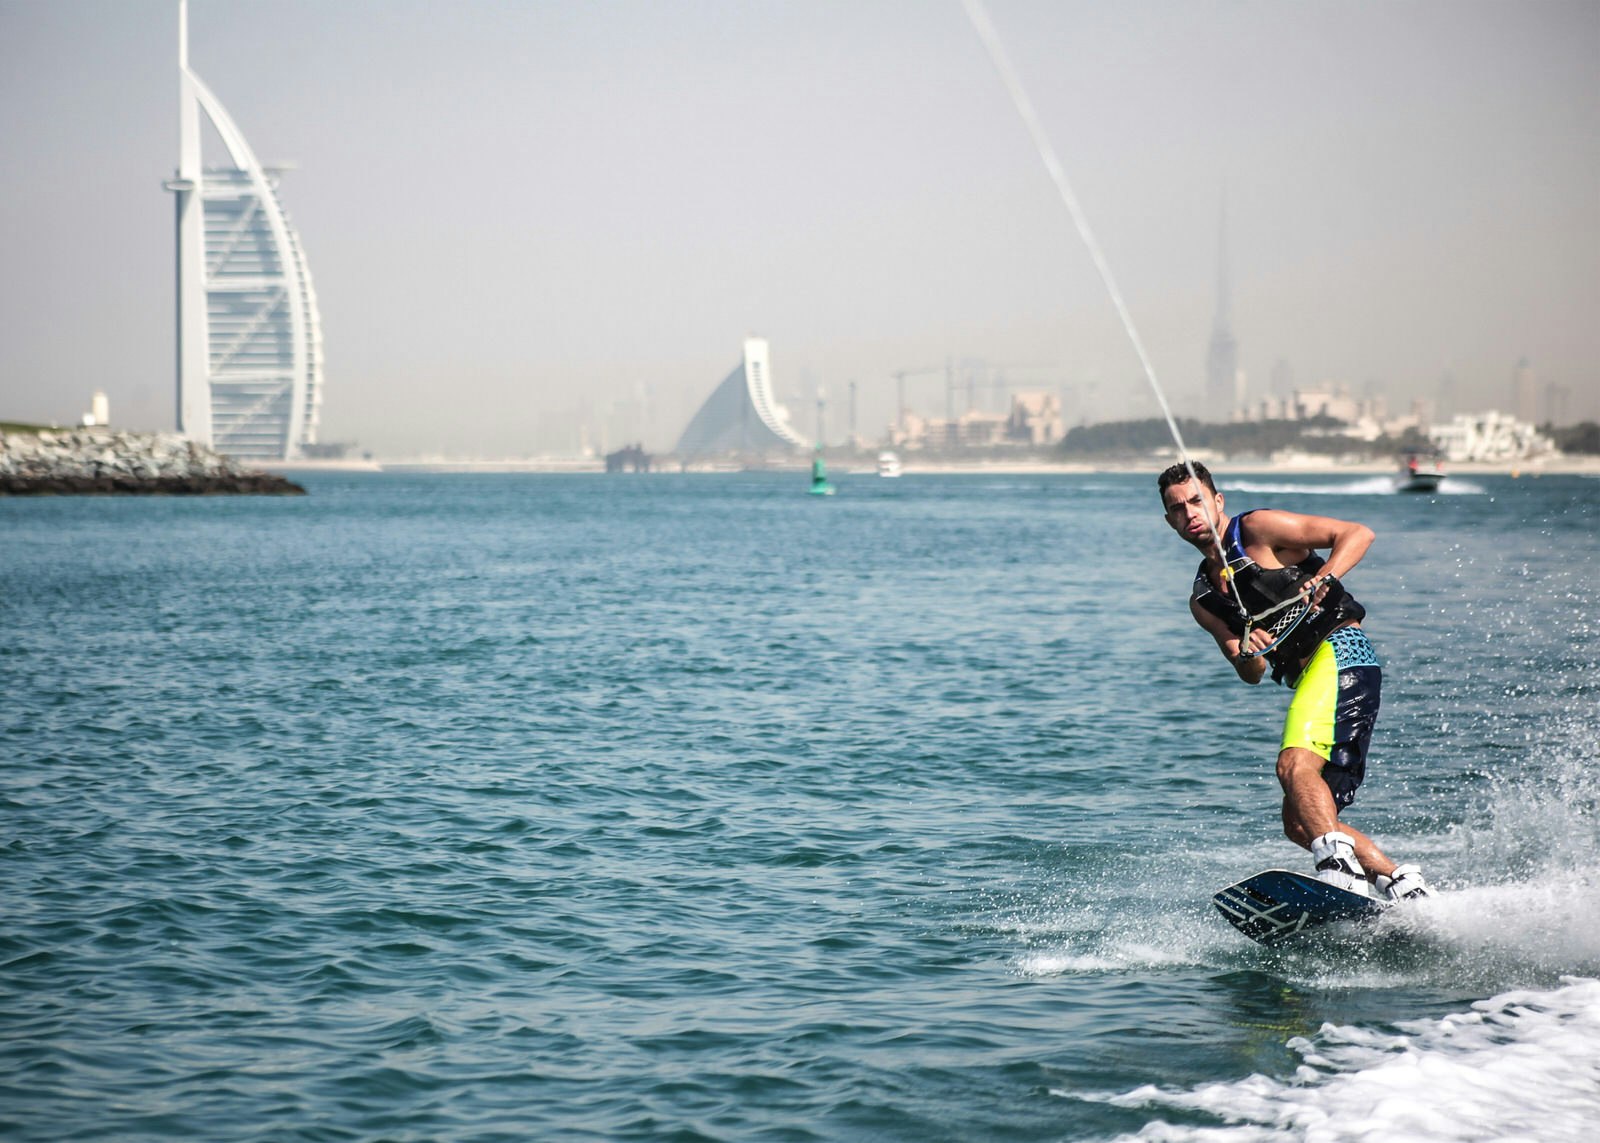 Wakeboarding in Dubai Marina. Image by Ayotography / Shutterstock